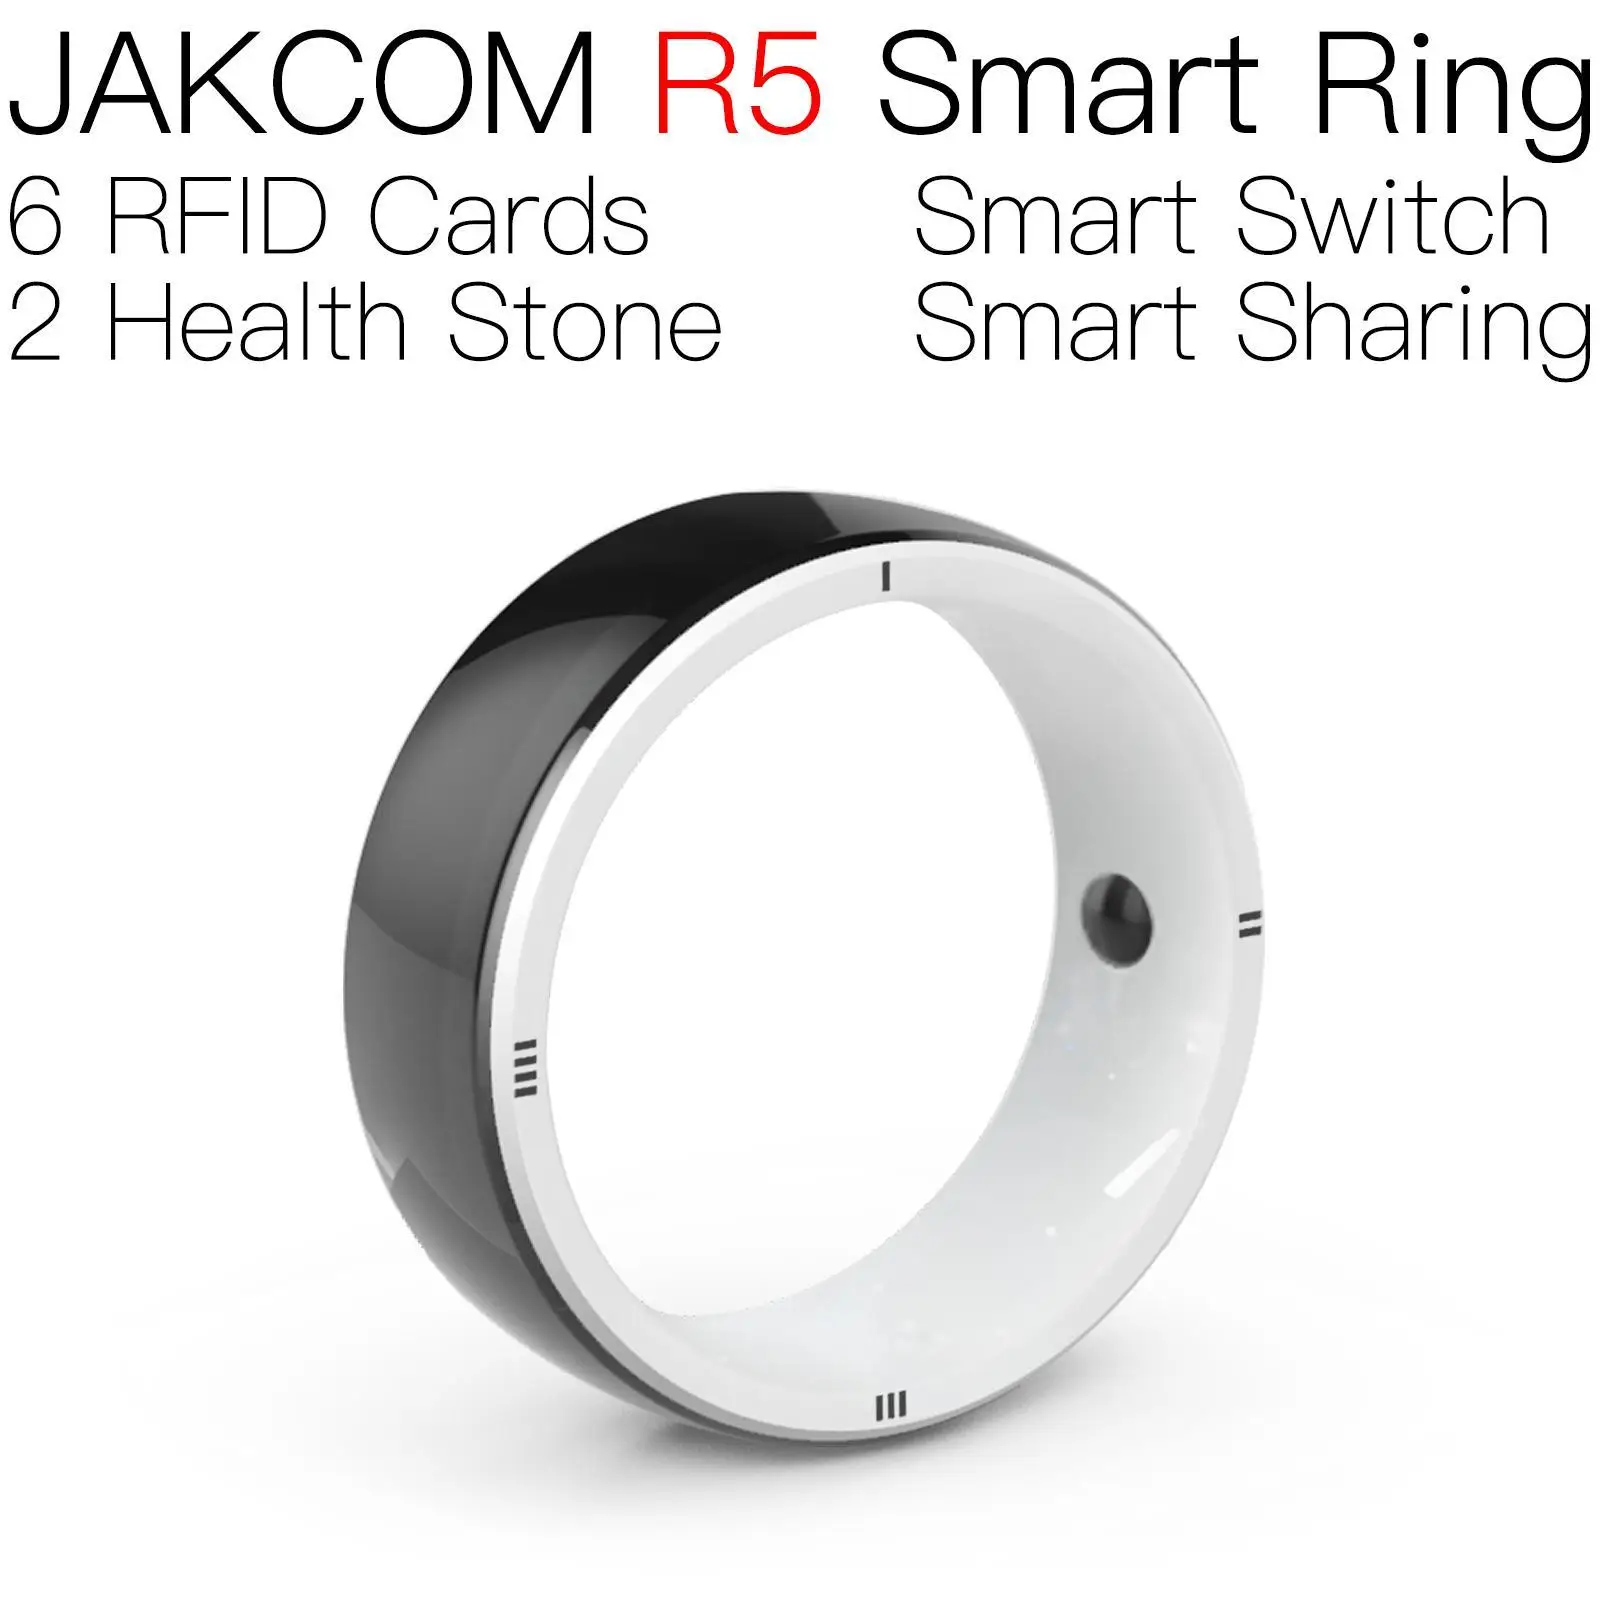 

JAKCOM R5 Smart Ring better than tag213 card ntag215 teslin hologram for canadian id new onedrive czip pet 100 pcs pvc sheets